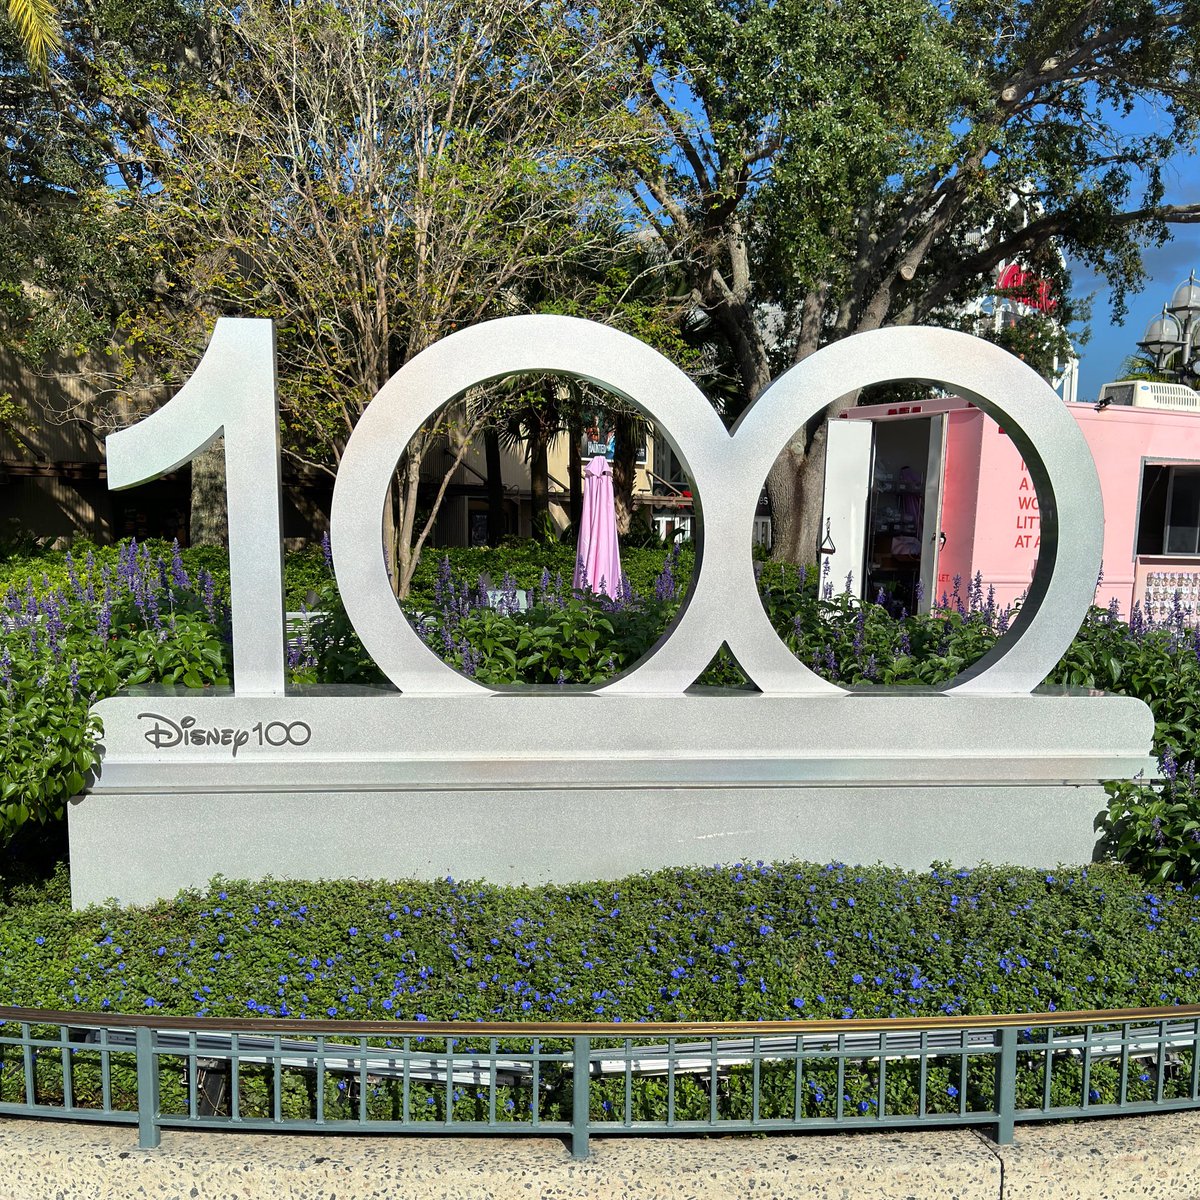 Disney has been celebrating its 100th anniversary and now it is our turn at The Great British Mickey Waffle We will be recording our 100th podcast tonight and can’t wait to share the show with you on the 1st December! #gbmw100 #disney100 #podcast #disneyworld